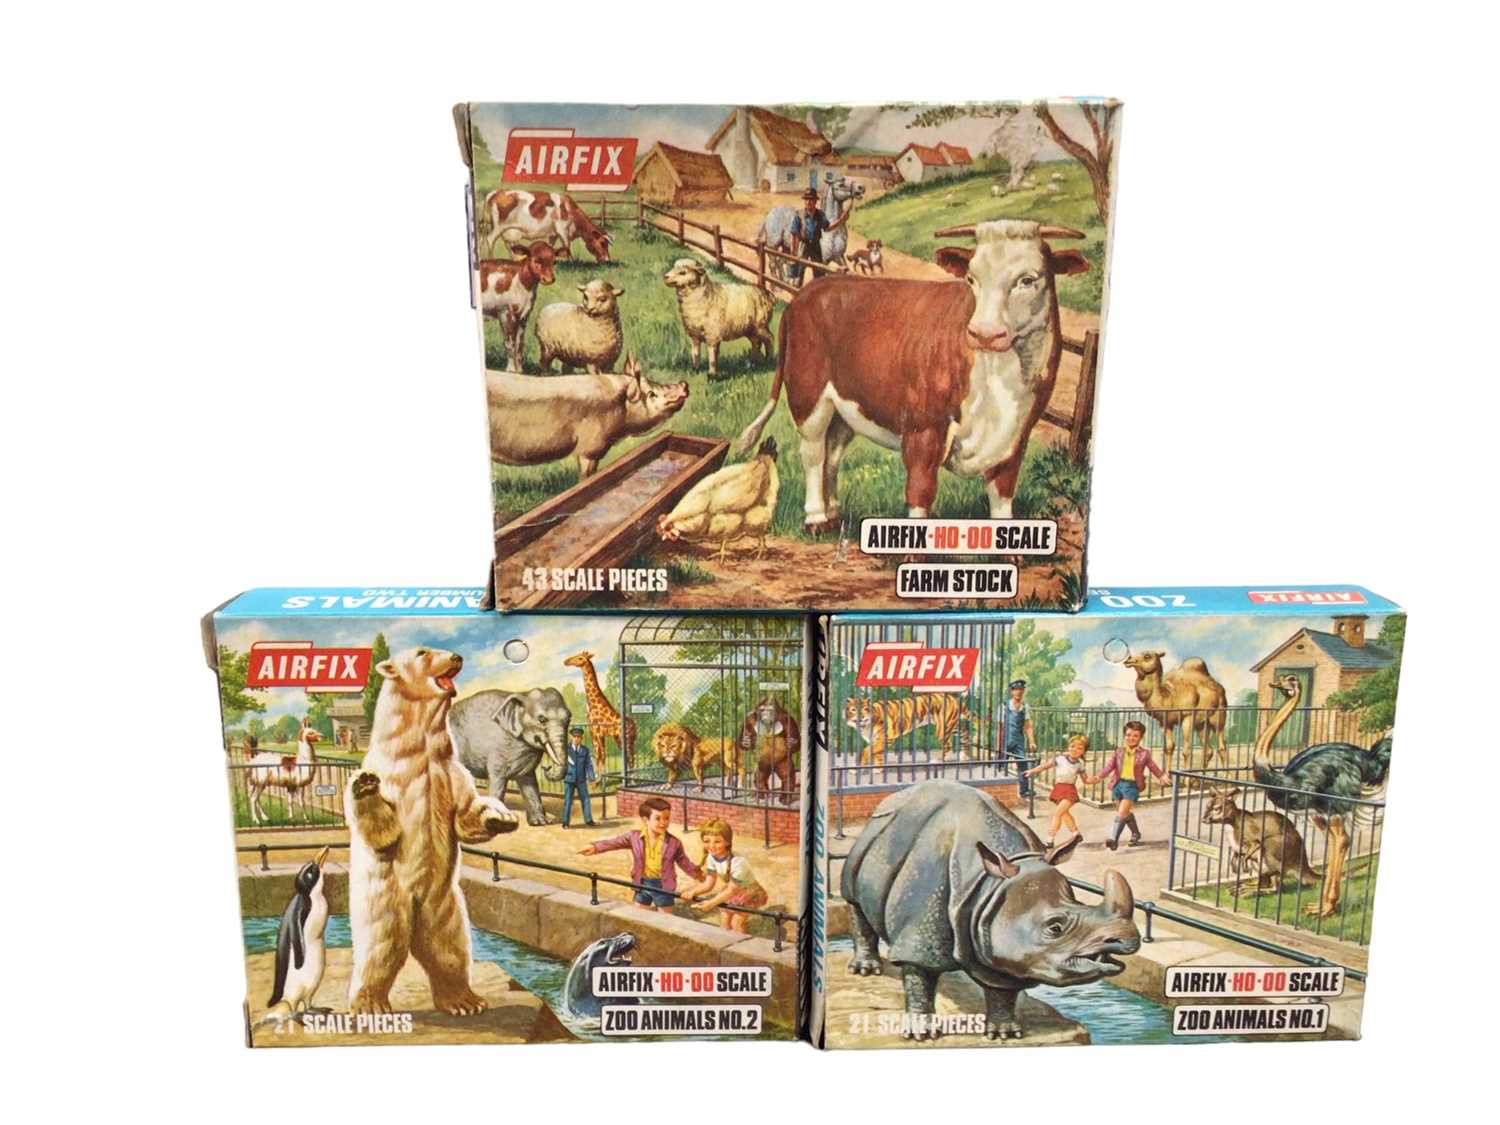 Lot 74 - Airfix HO OO scale Animal Series including Zoo Animals Set No.1 (x13), Zoo Animals Set No.2 (x6) & Farm Stock (x3), all boxed (22)